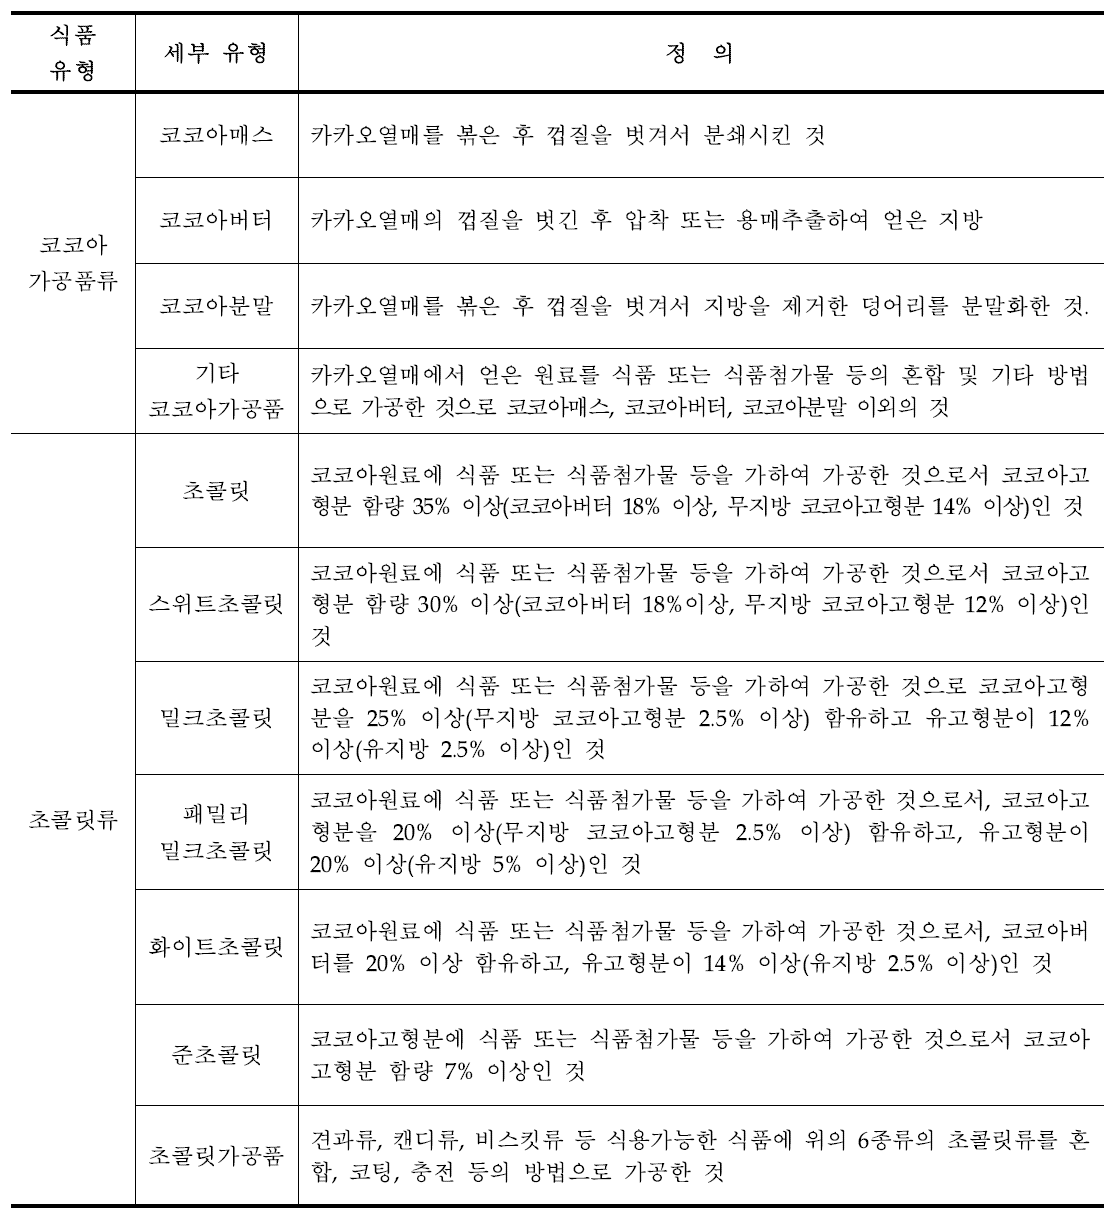 Classification and definition of cocoa products and chocolates in Korea.